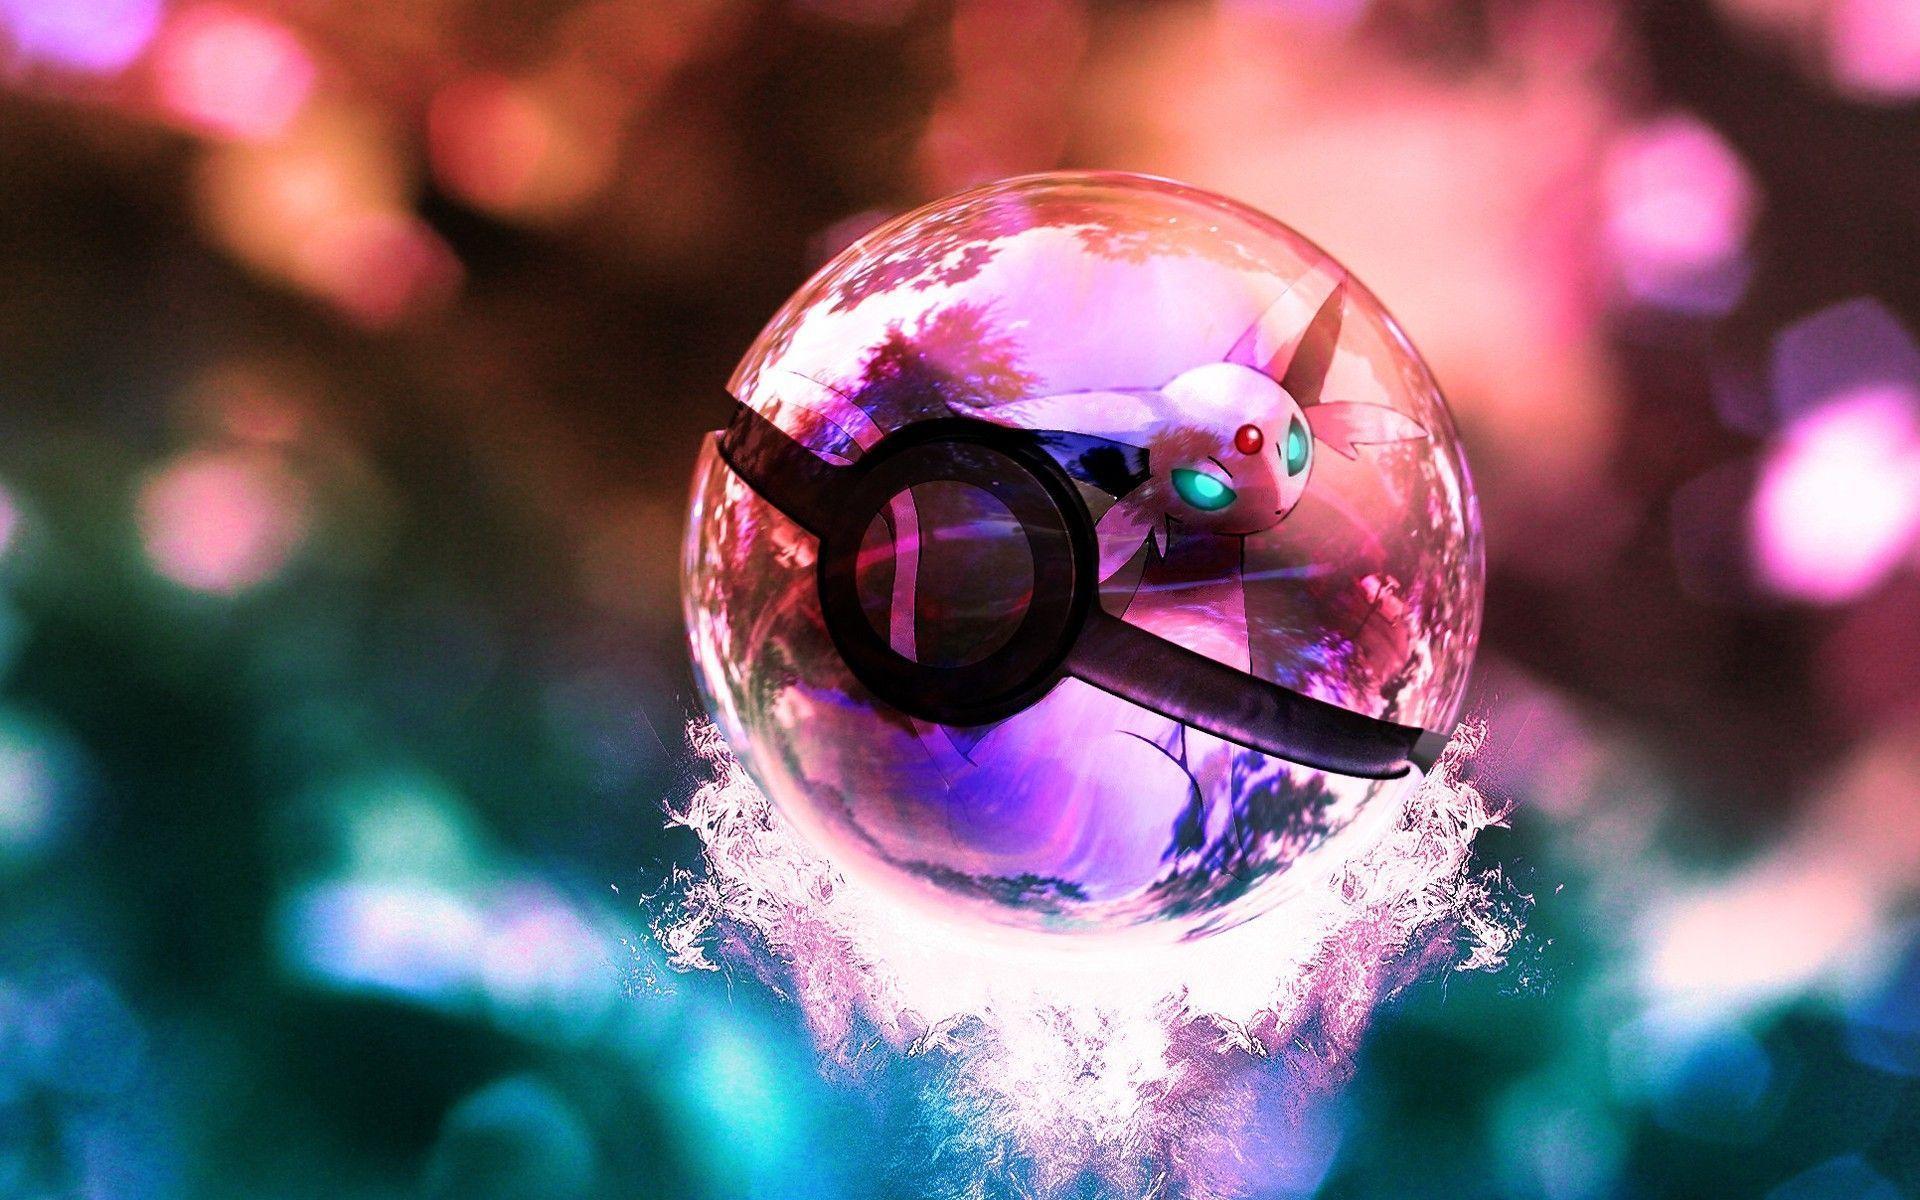 Cool Pokemon Backgrounds - Wallpaper Cave